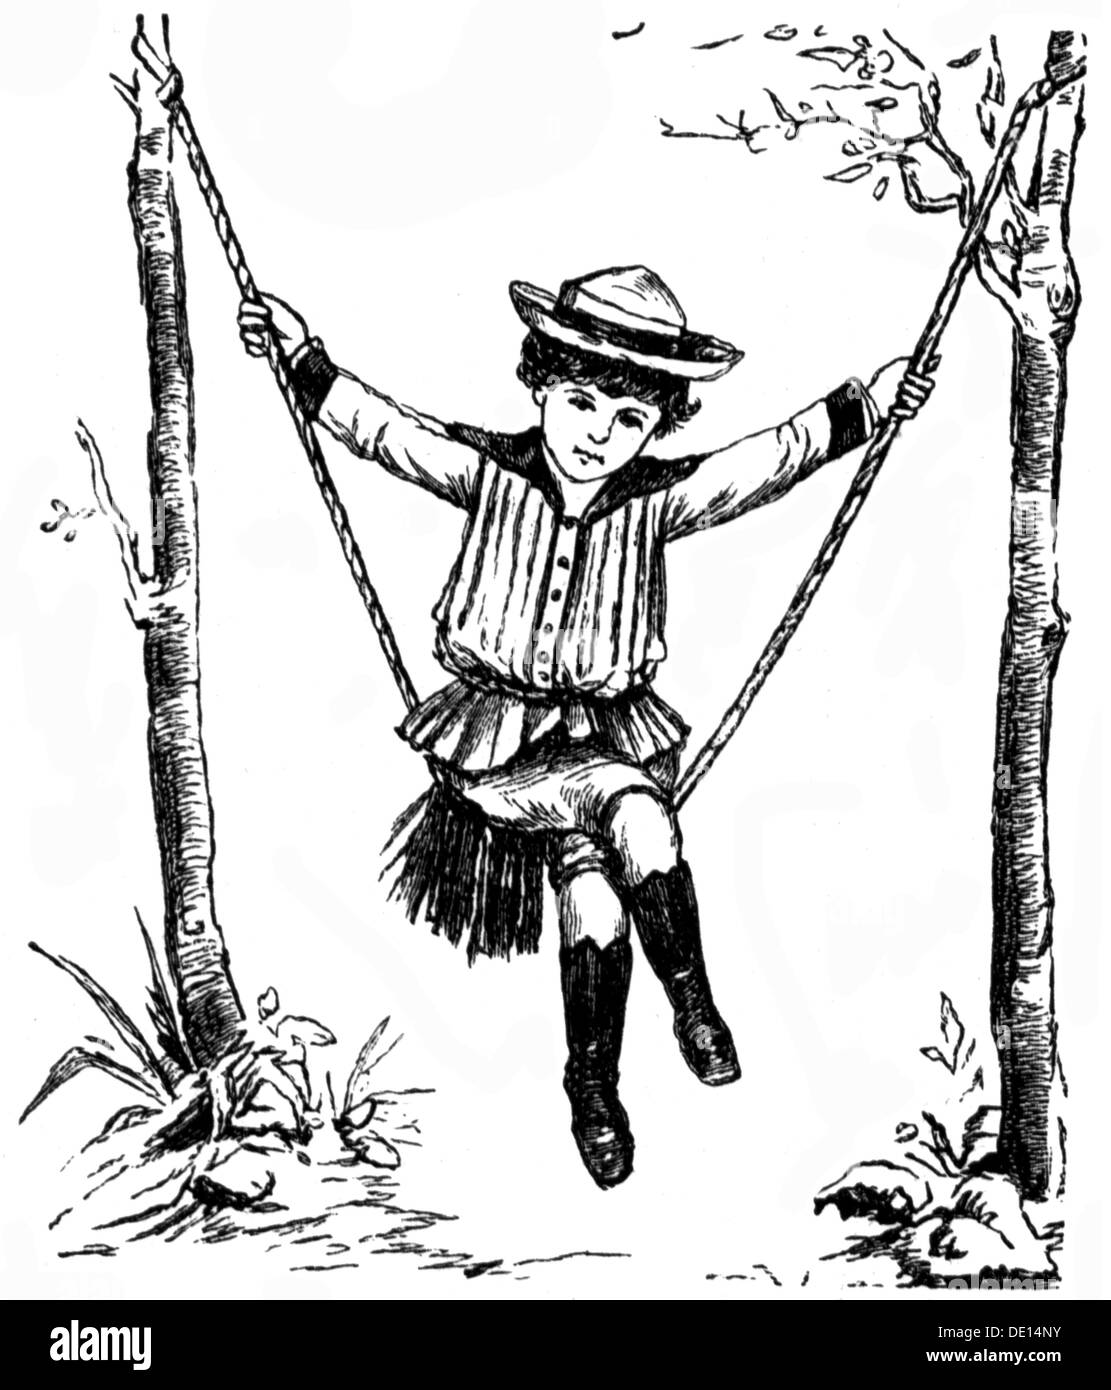 fashion, children's fashion, boy on a swing, wood engraving, 1883, Additional-Rights-Clearences-Not Available Stock Photo